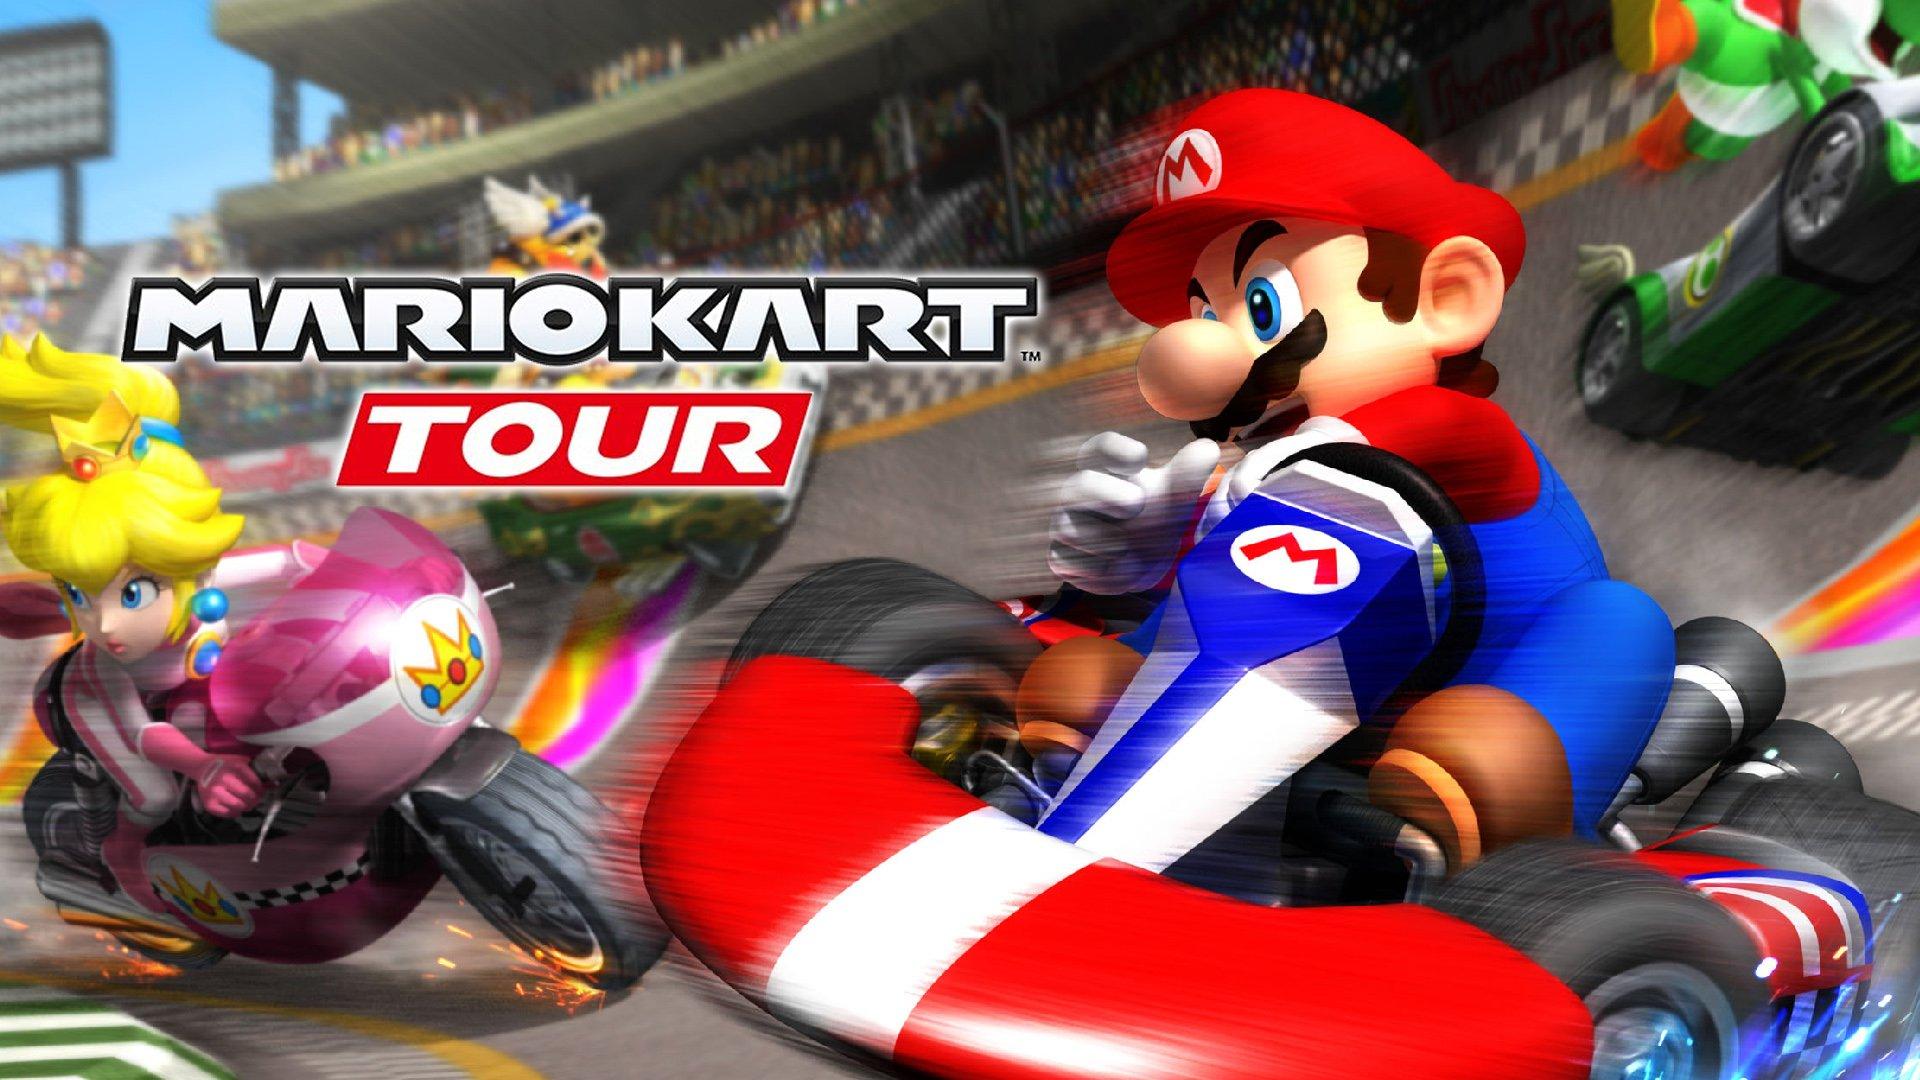 Mario Kart Tour is officially coming to Android on September